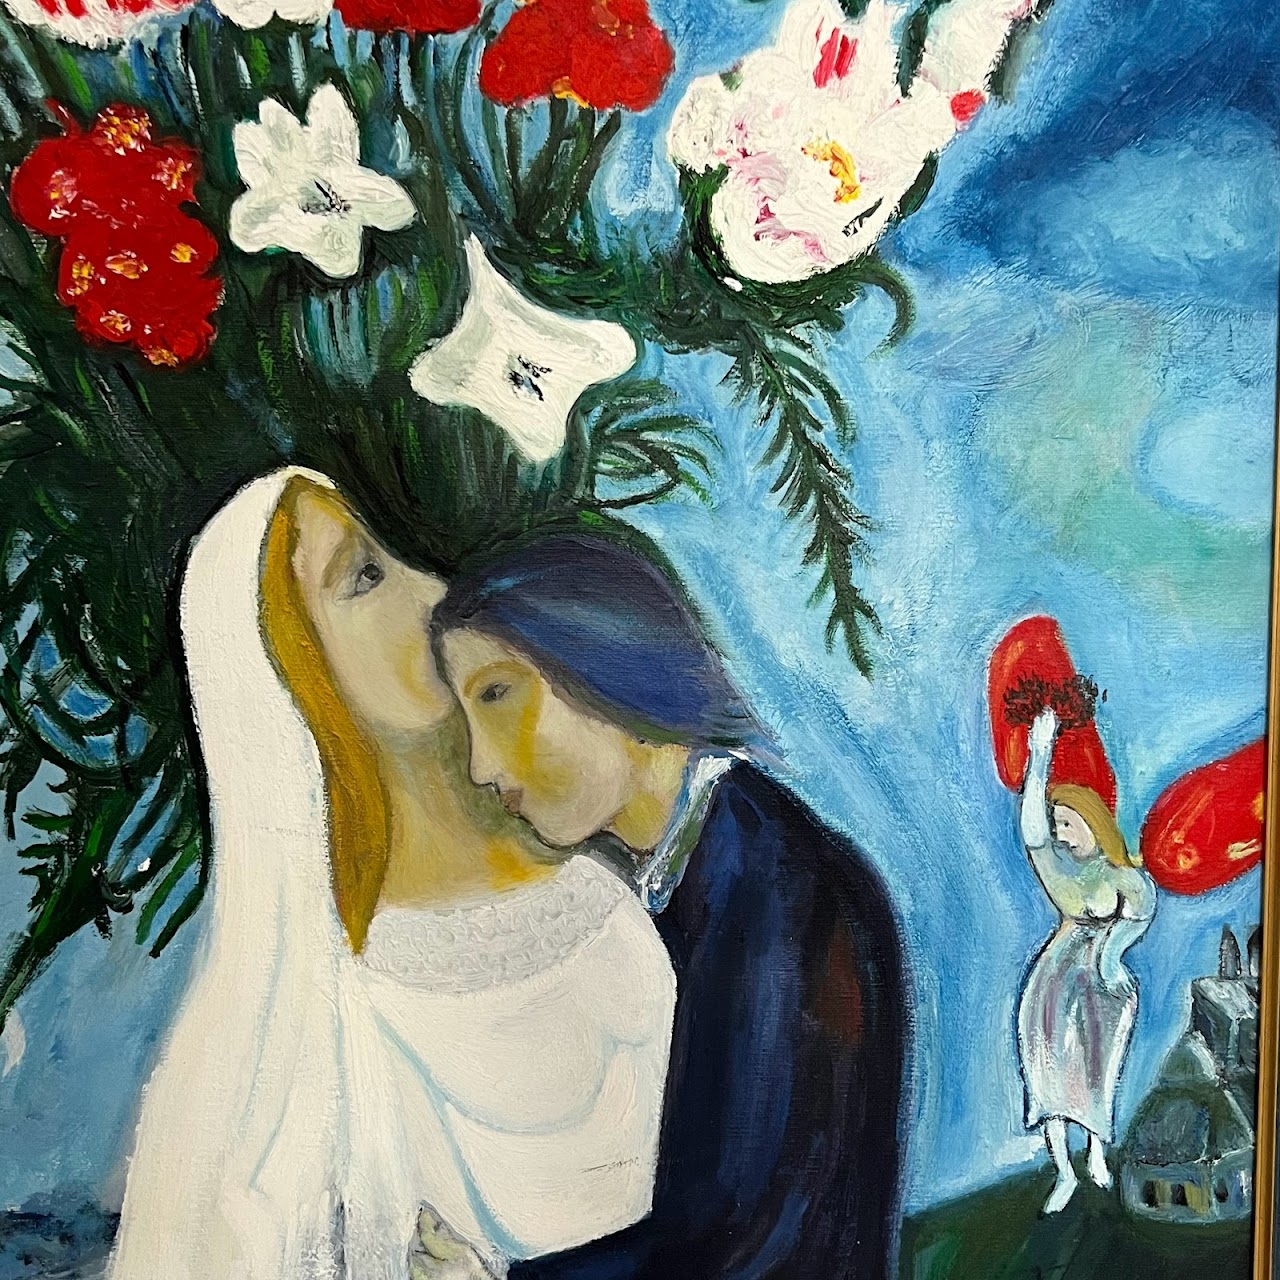 After Chagall Marriage Painting Reproduction